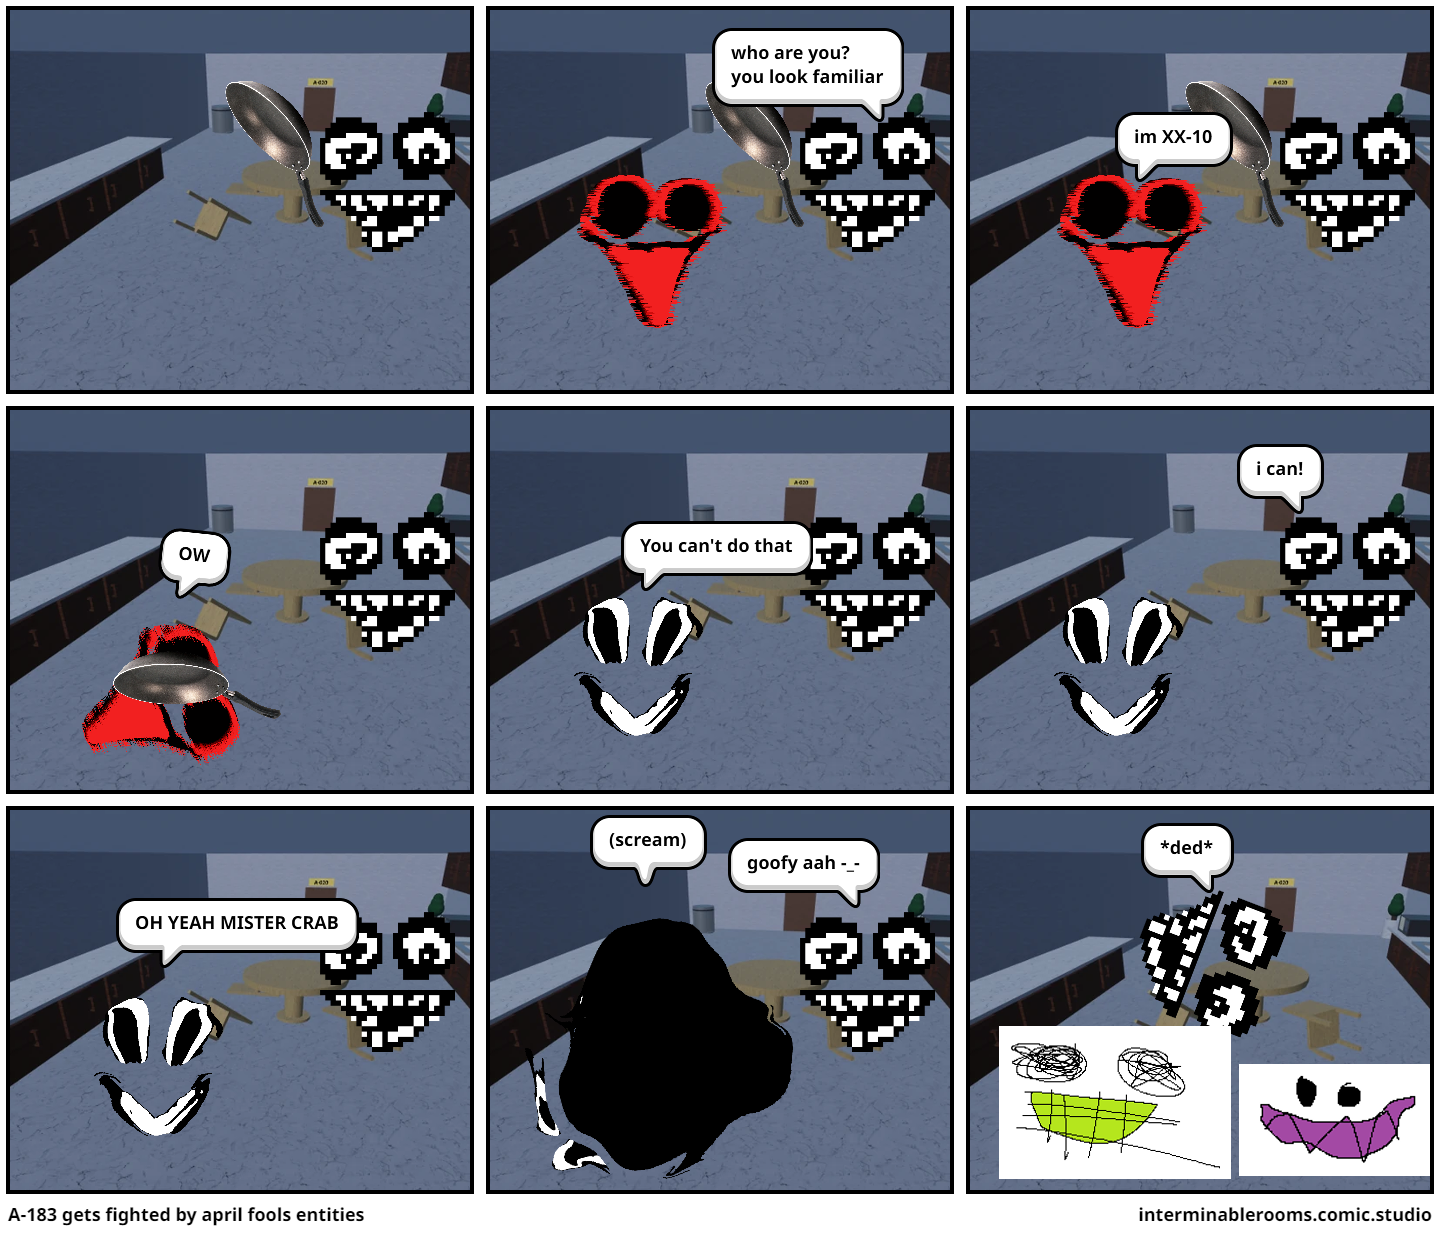 a-183-gets-fighted-by-april-fools-entities-comic-studio